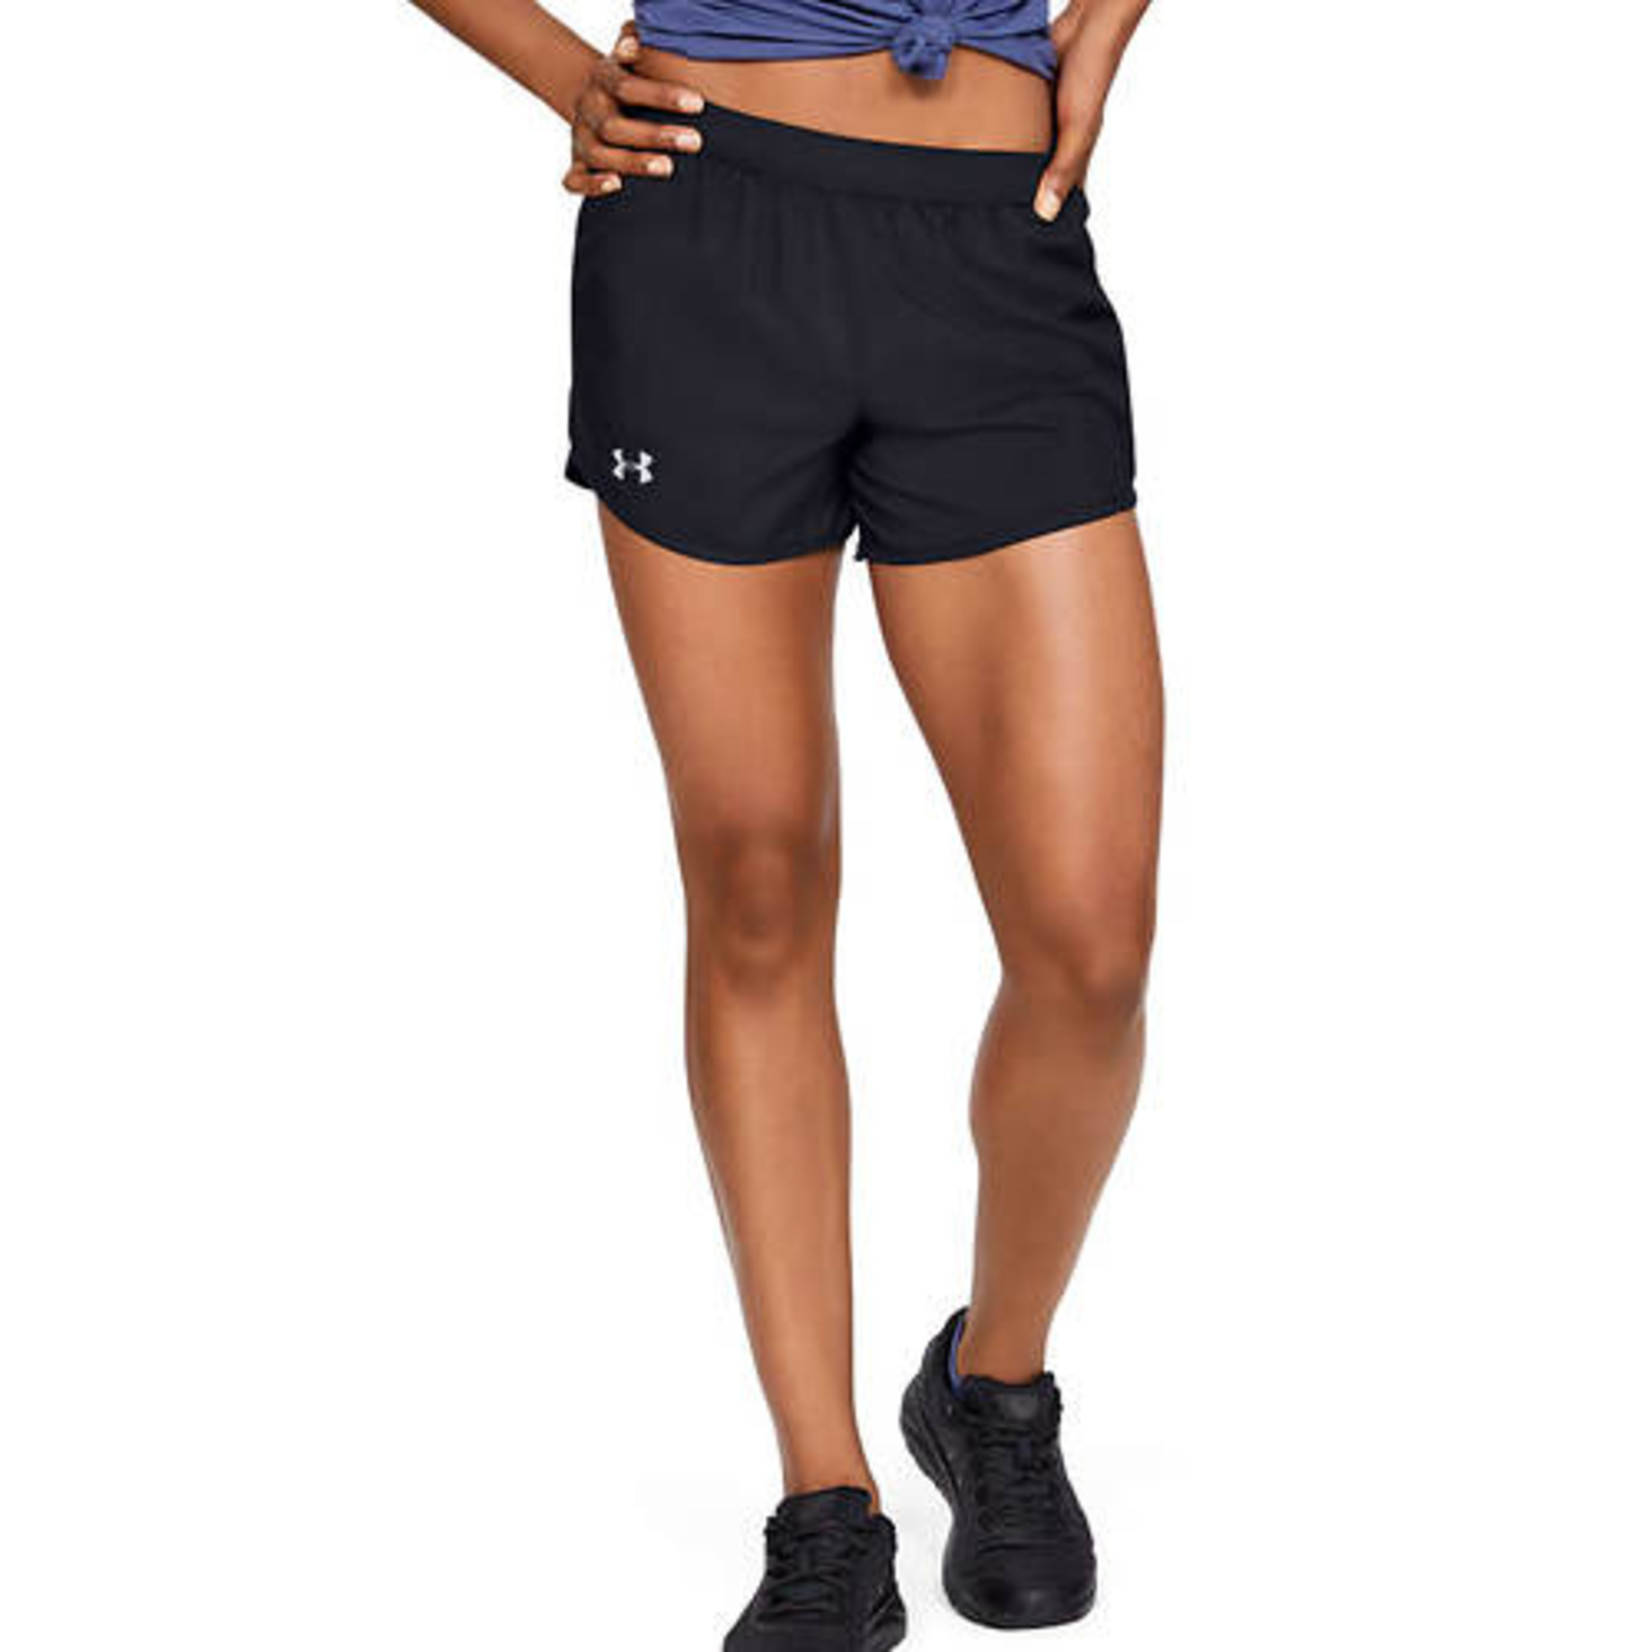 Under Armour Under Armour Women's Fly By 2.0 Short -3XL - Black